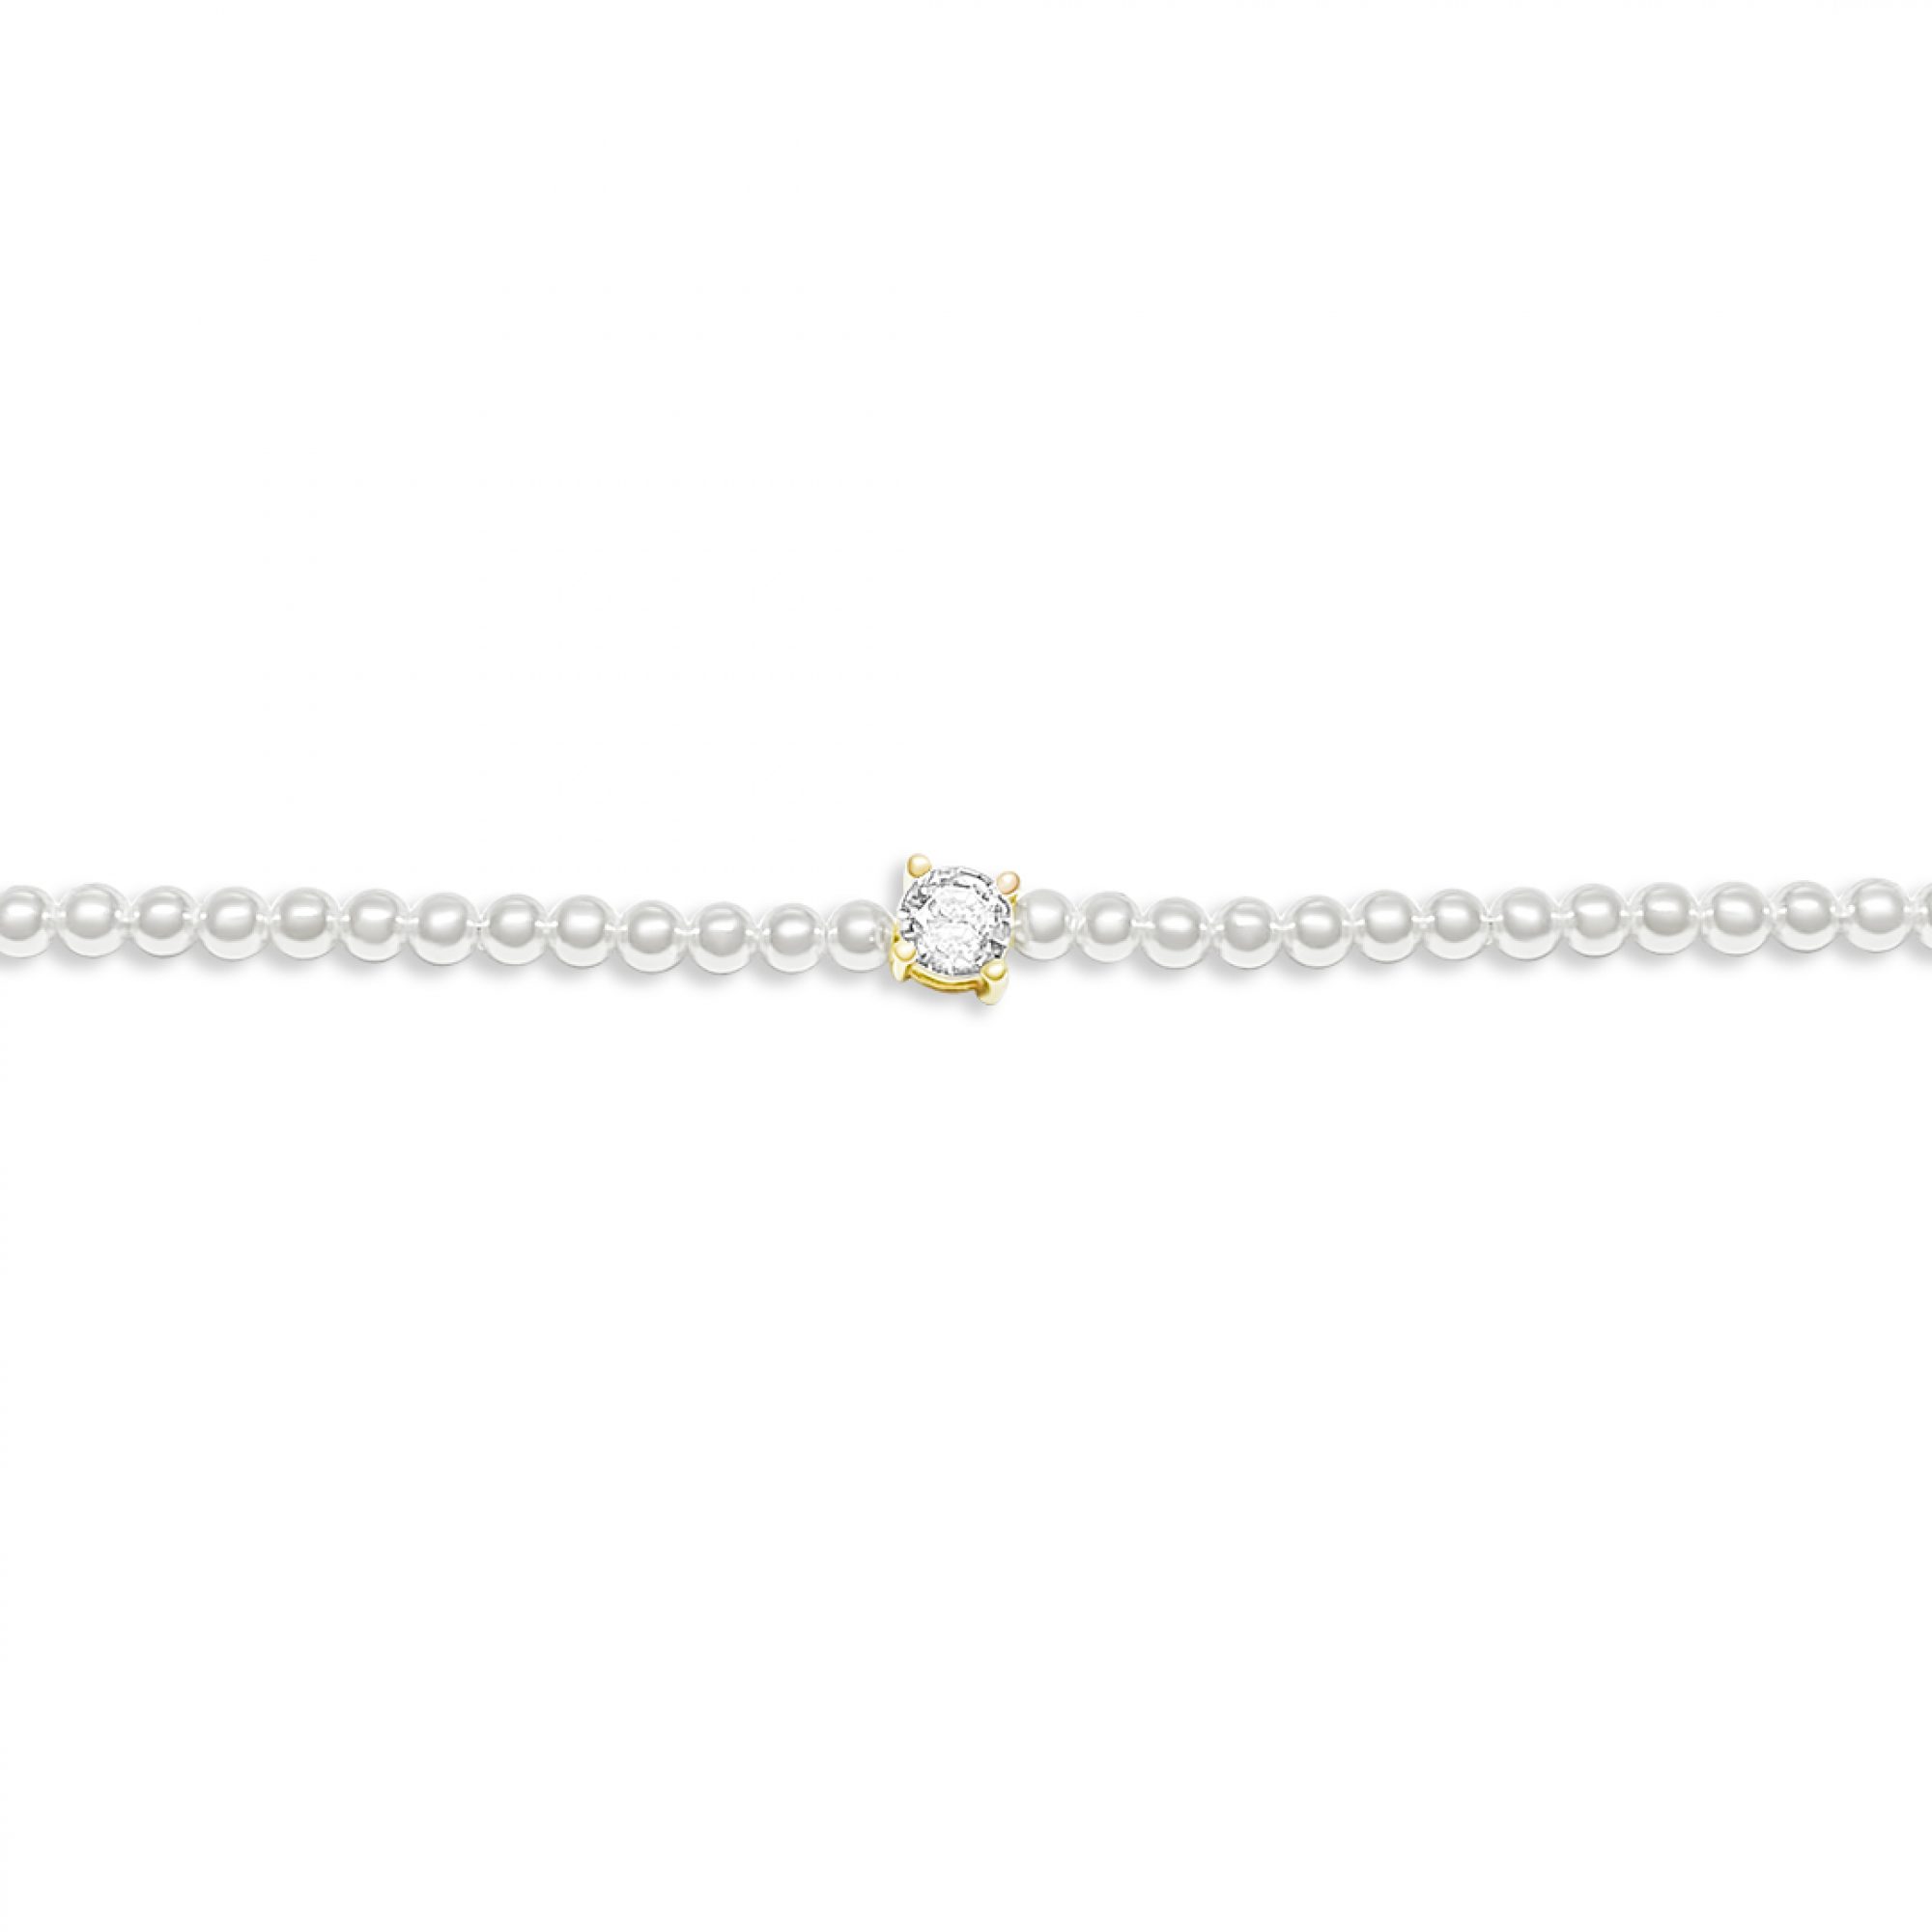 Gold plated bracelet with zircon stone and pearls